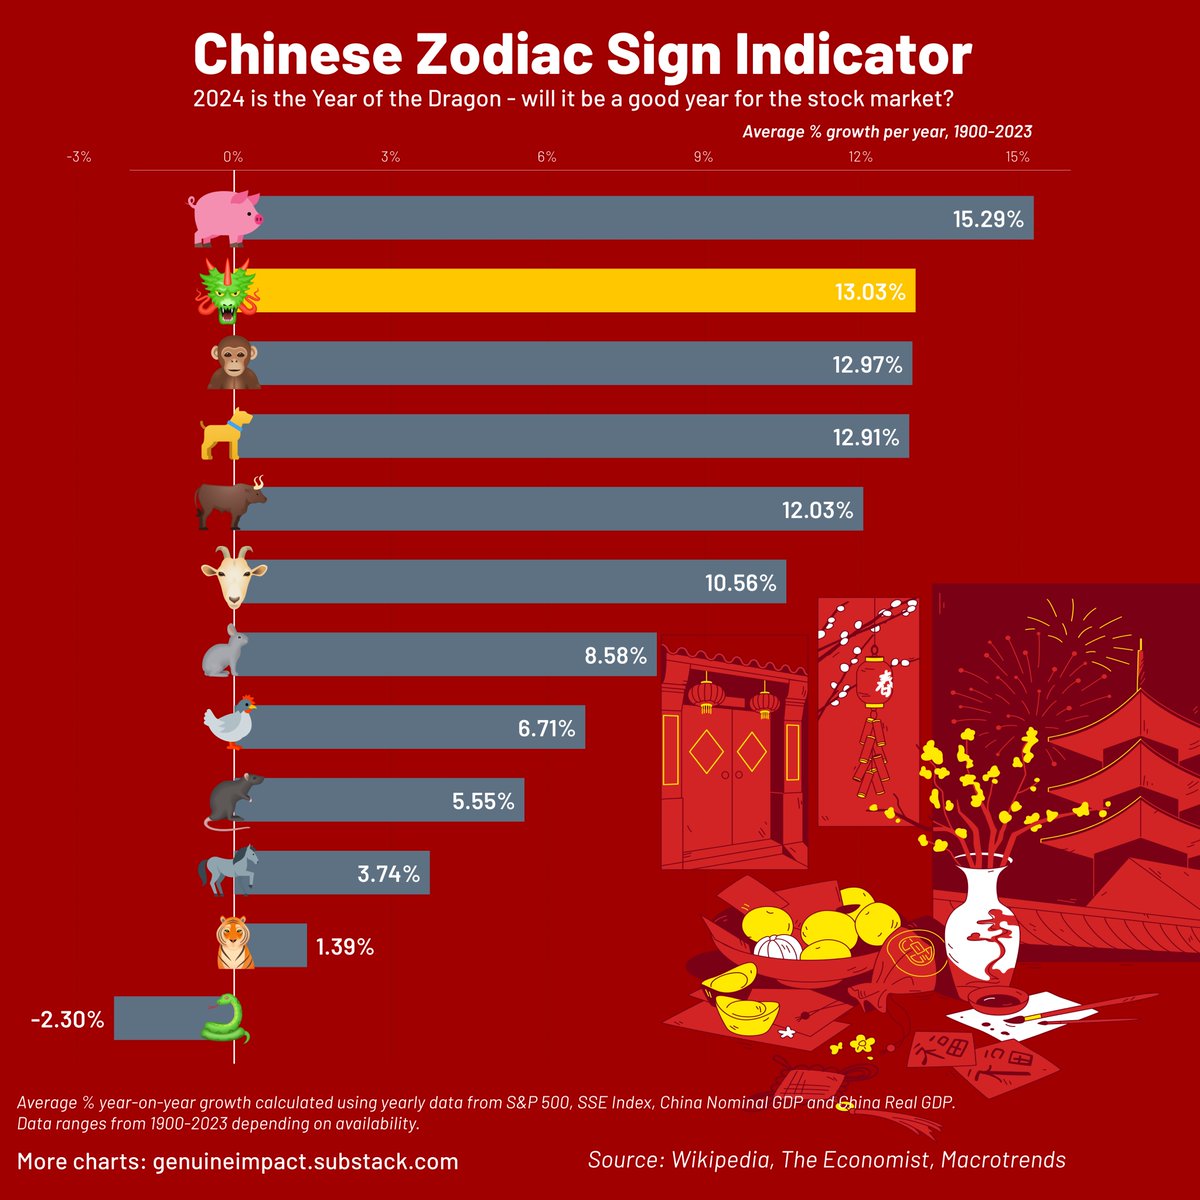 🎉Today is #LunarNewYear's Eve🐲. We wish everyone a happy Lunar New Year🎆. 😮Many unusual economic indicators have been linked to changes in market behaviour, including the Chinese Zodiac. 🐲2024 is the #YearofDragon - will it be a good year for the stock market🤔? #data